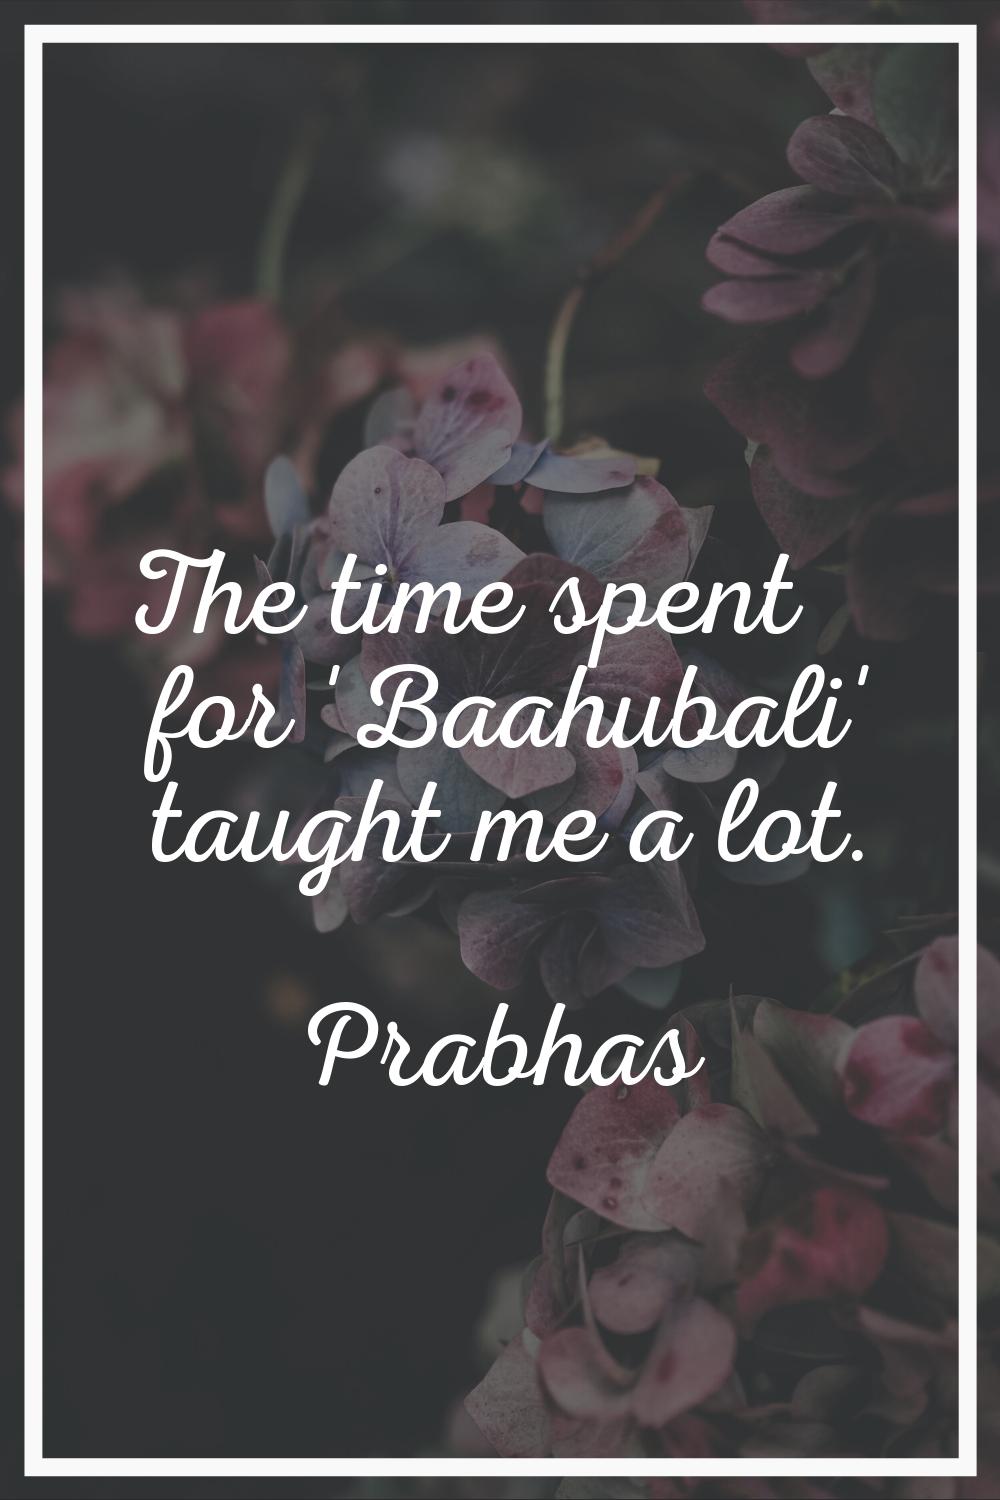 The time spent for 'Baahubali' taught me a lot.